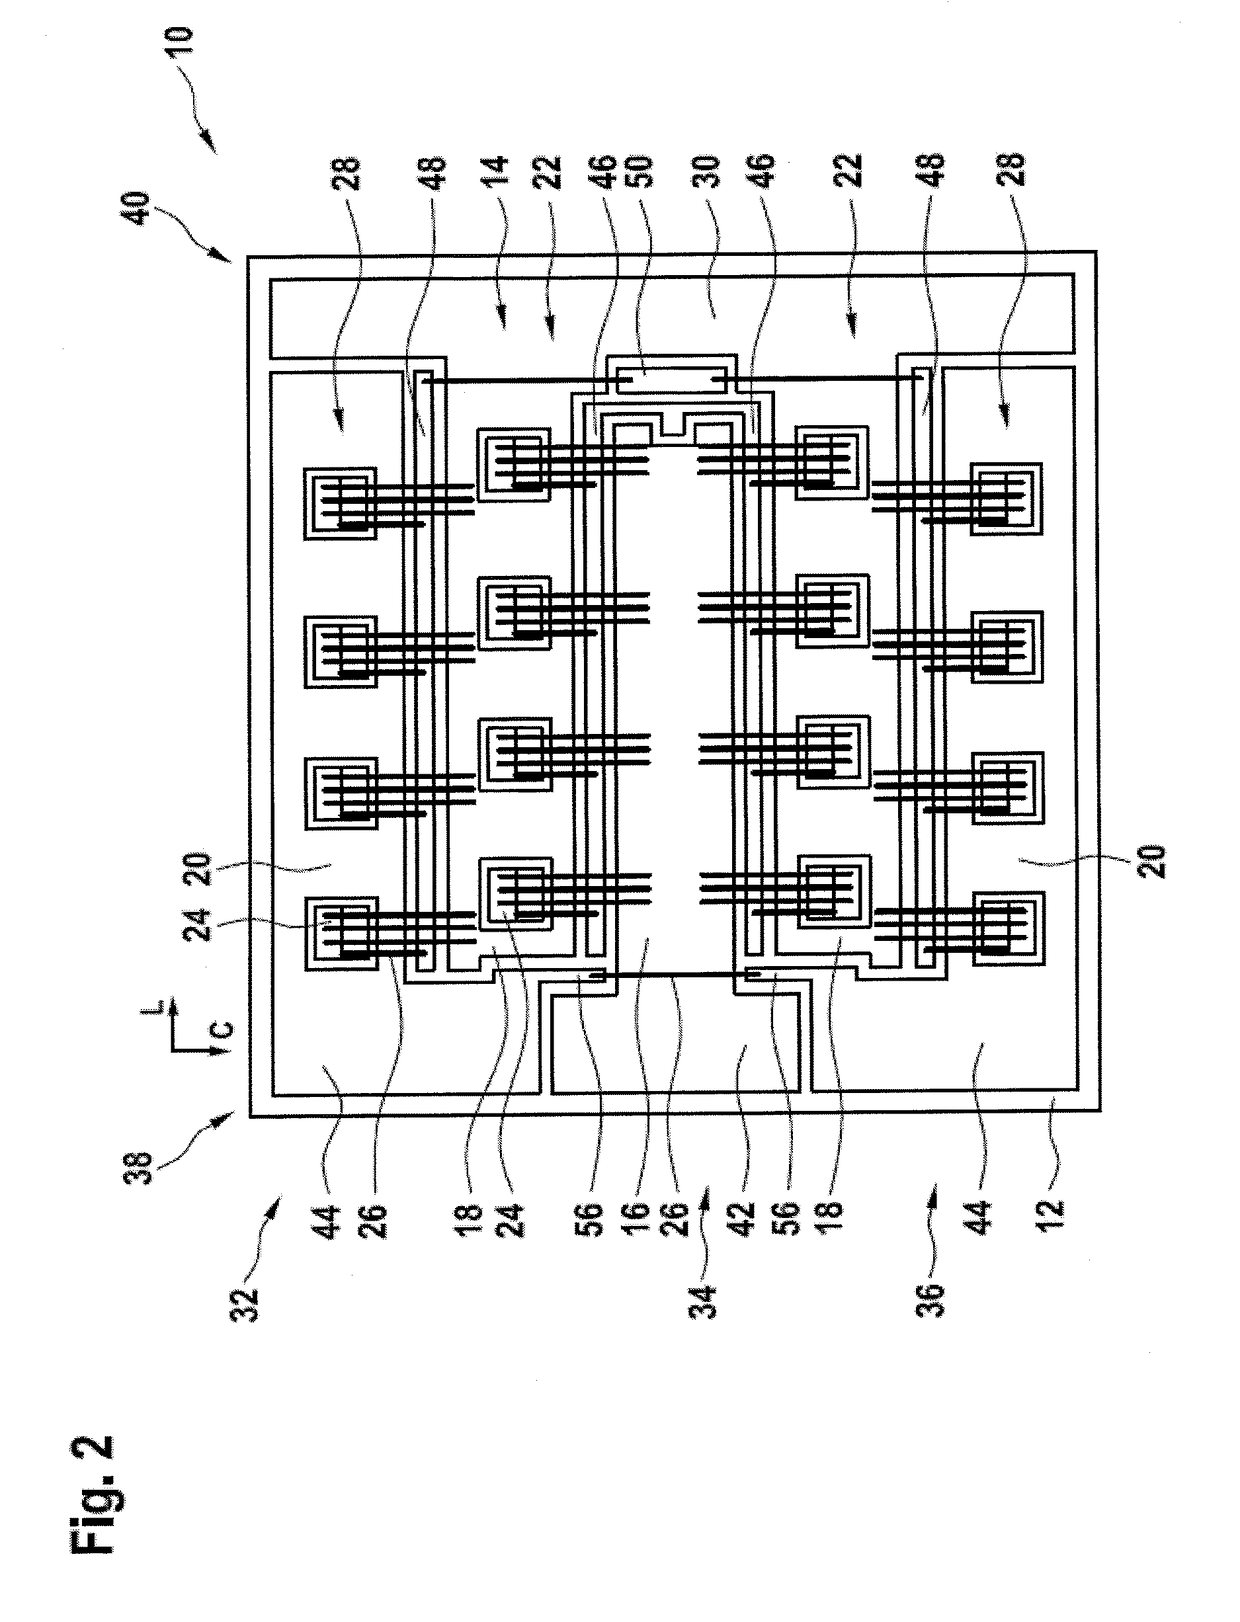 Power module with low stray inductance